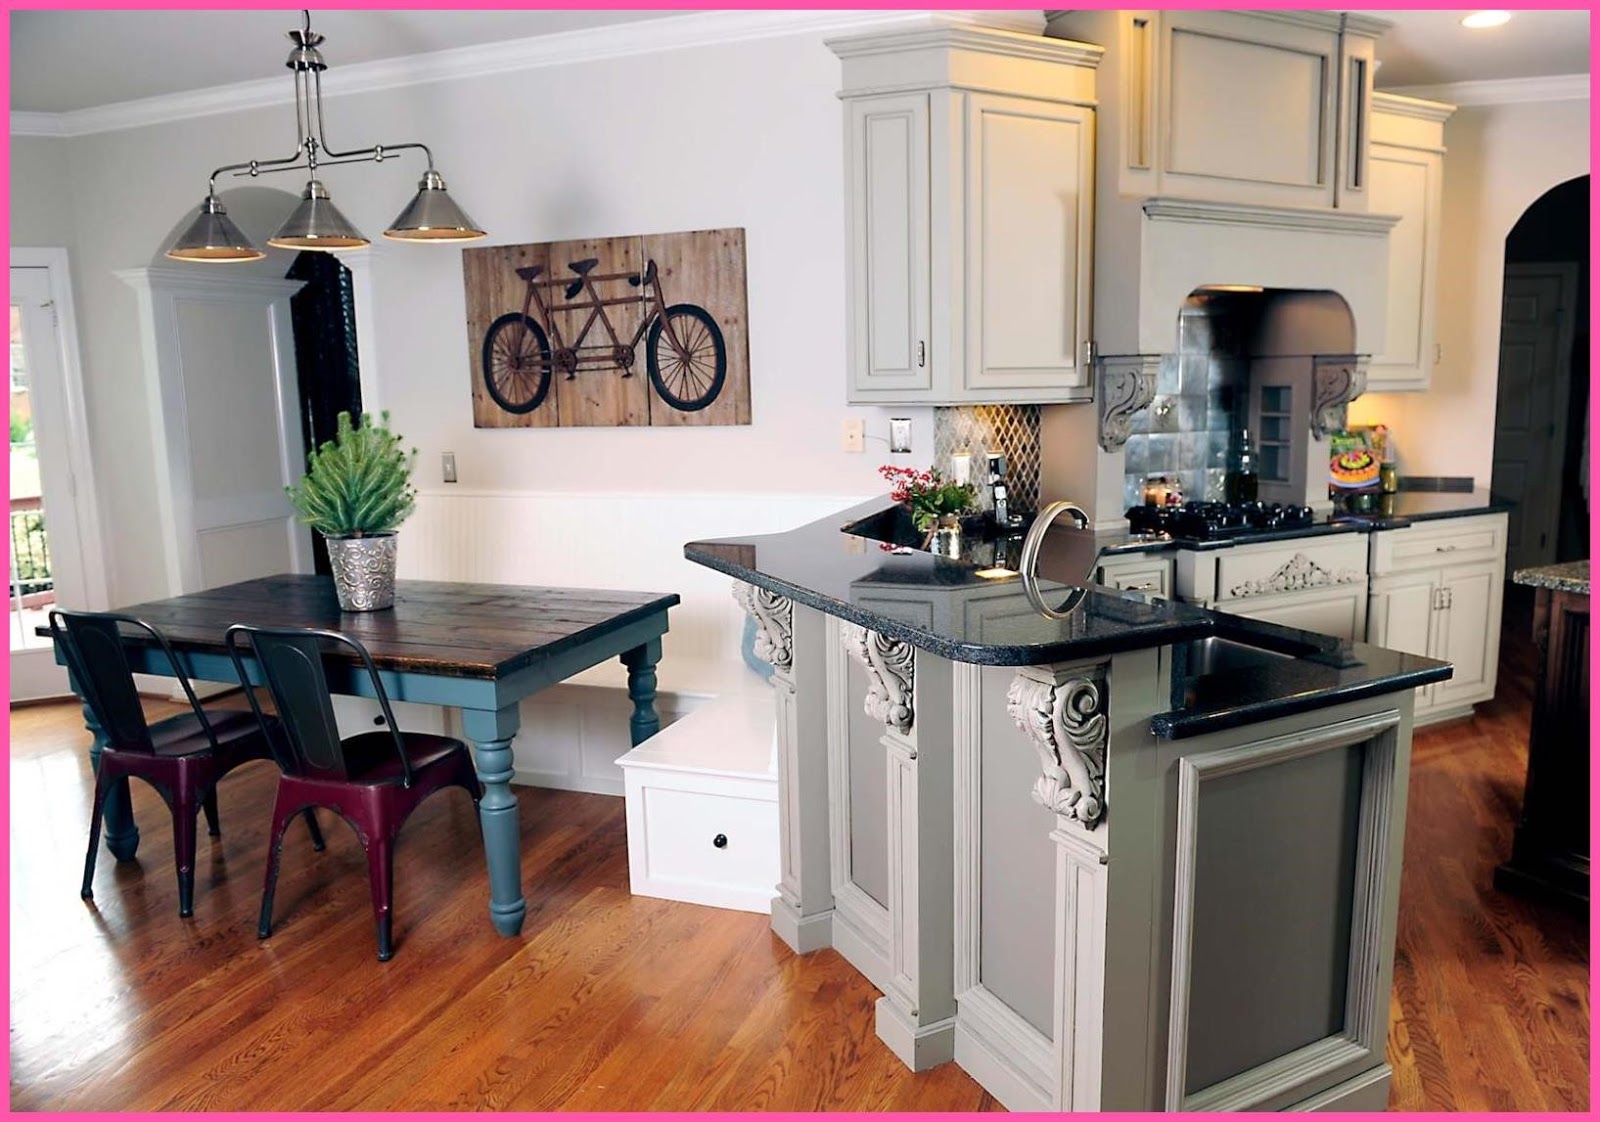 15 Kitchen Nook Cabinets Have you considered Grey Kitchen Cabinets? Kitchen,Nook,Cabinets